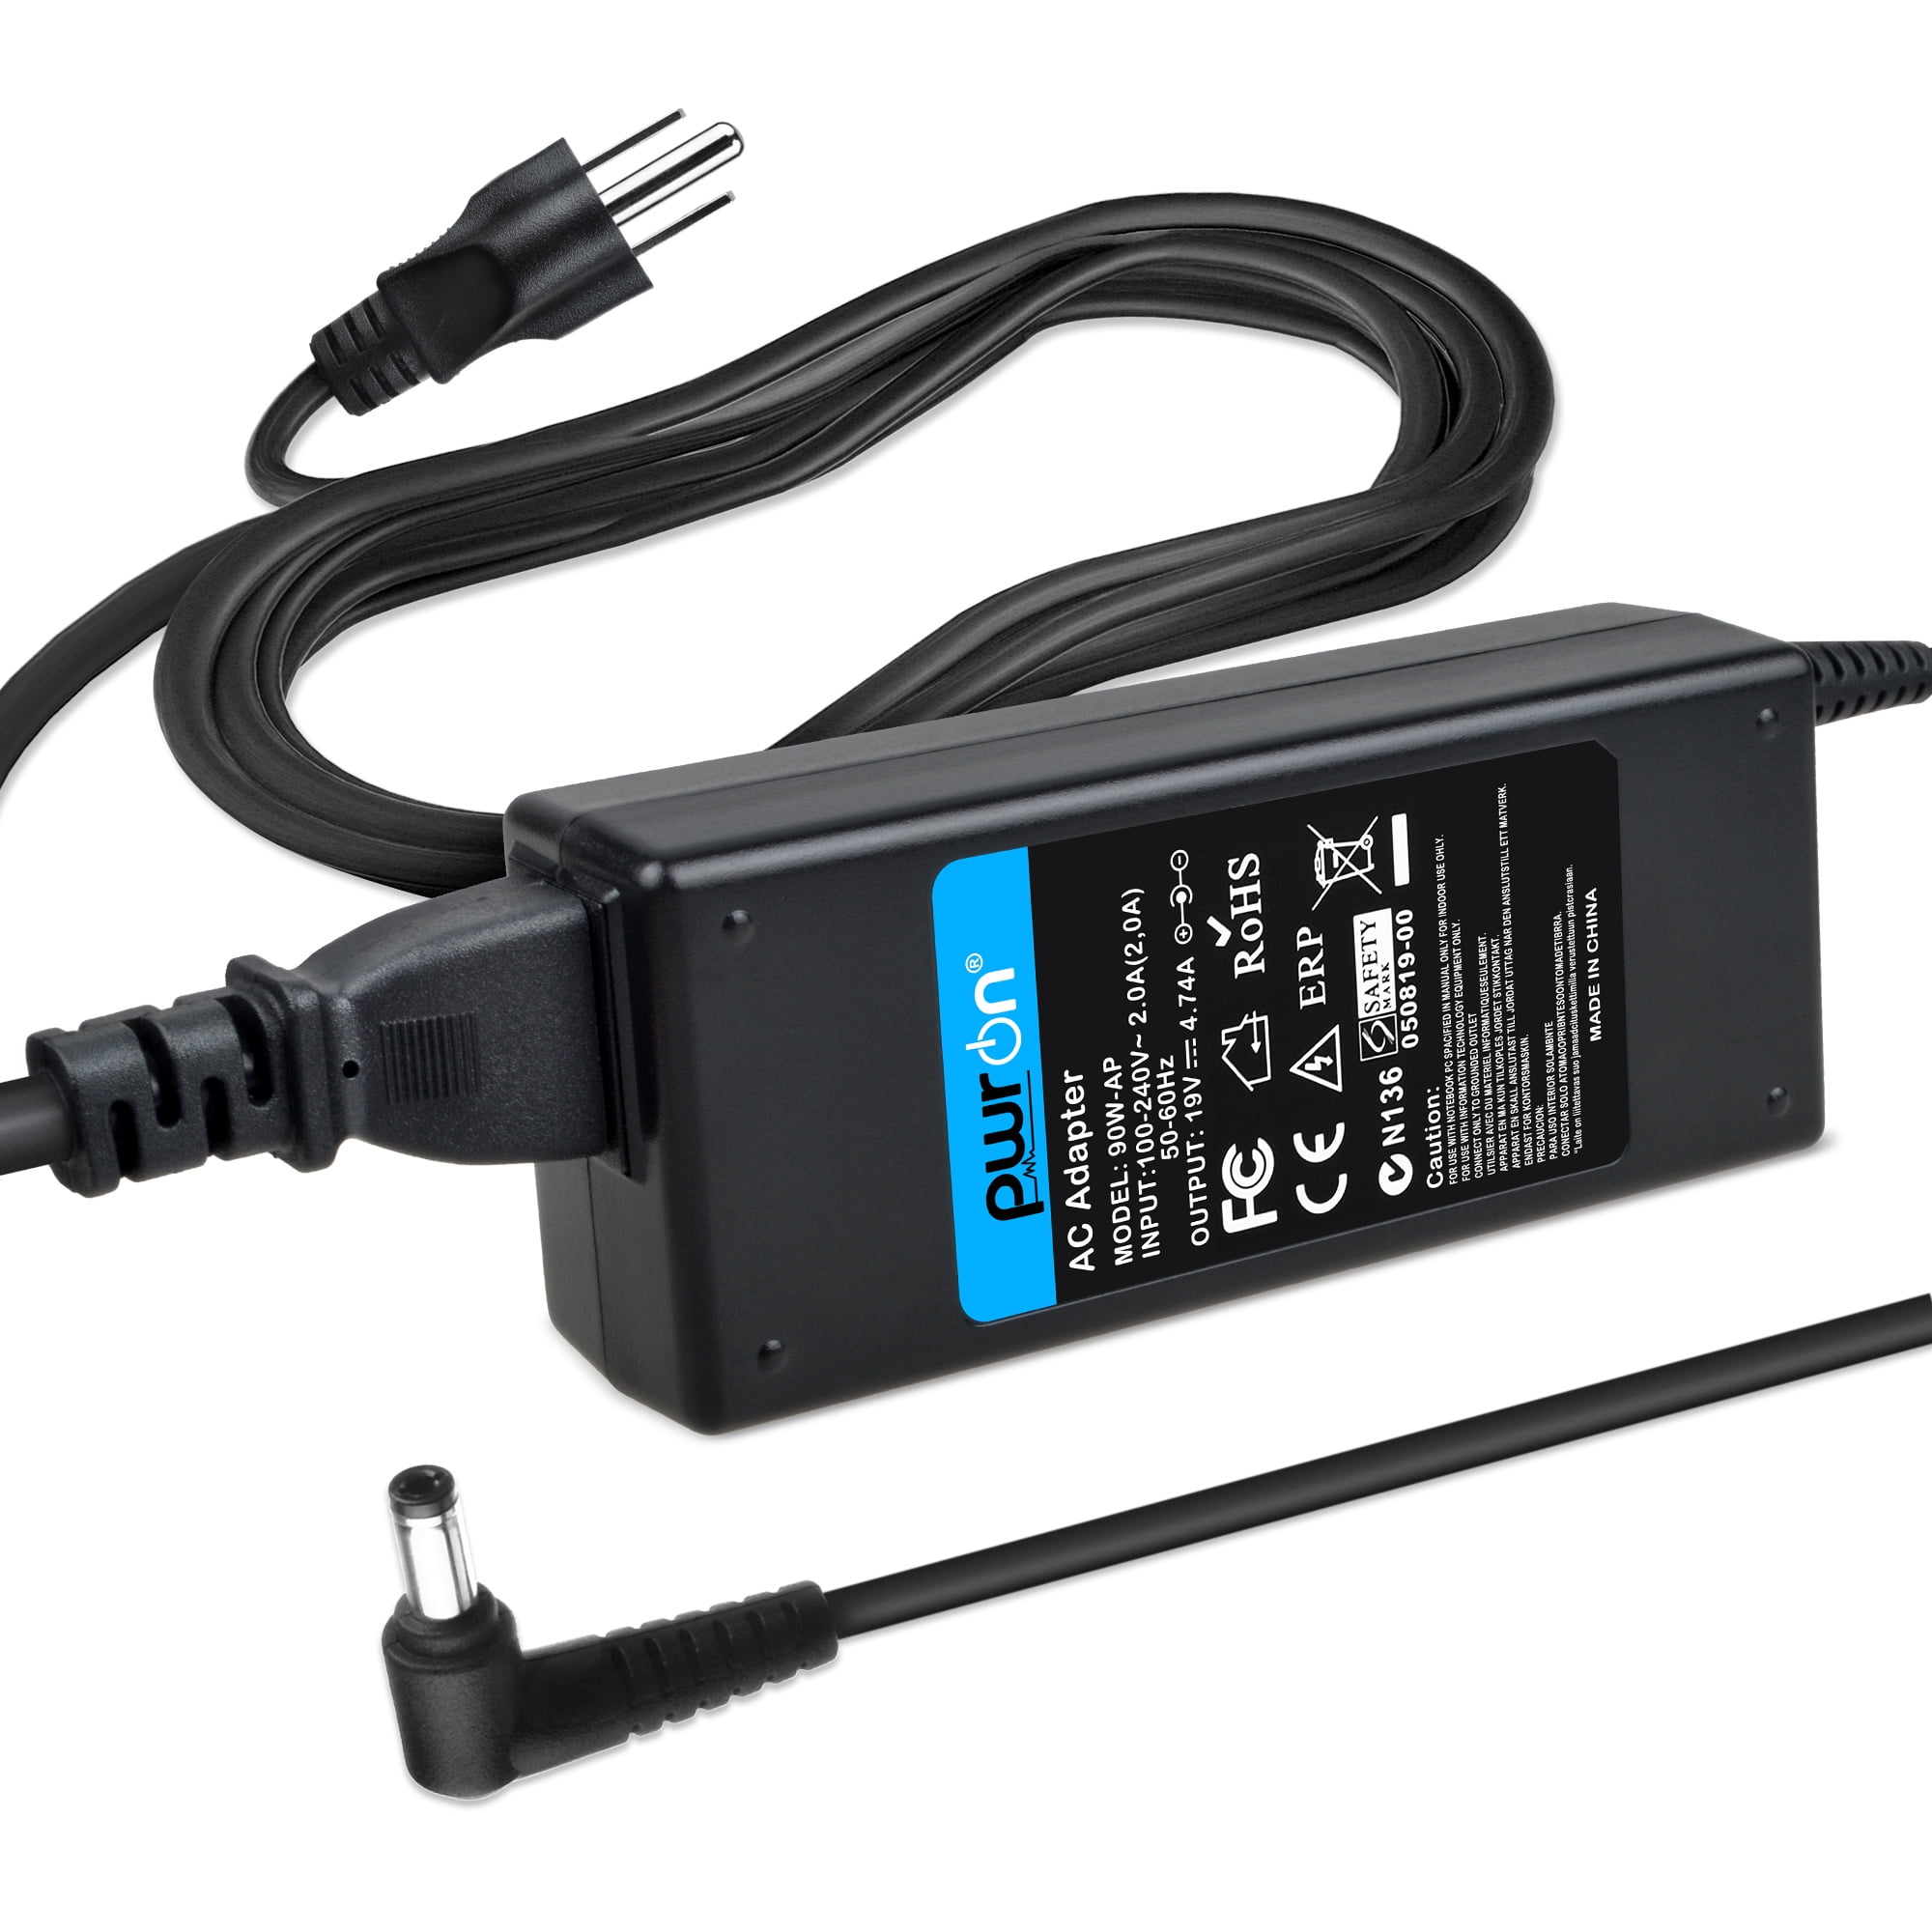 19V 90W AC Adapter For Getac B300 B300X Fully Rugged Laptop Charger Power Supply 